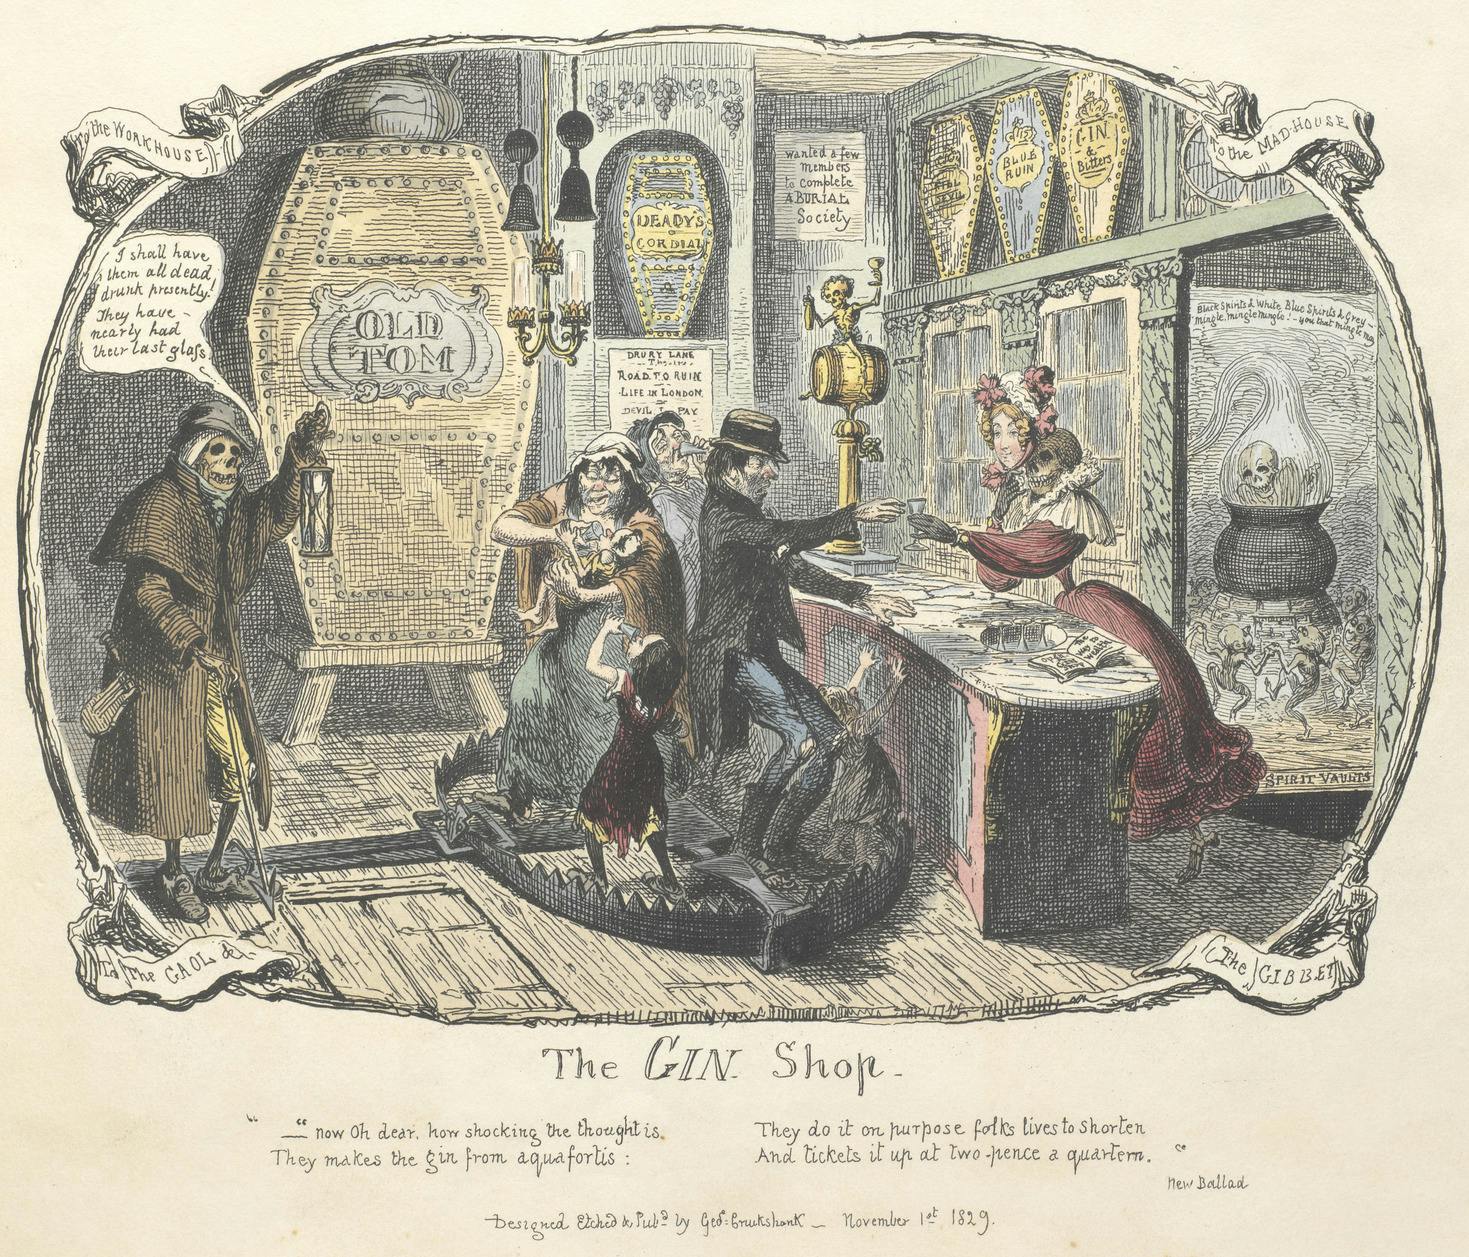 1829 illustration of people at an illicit gin joint.